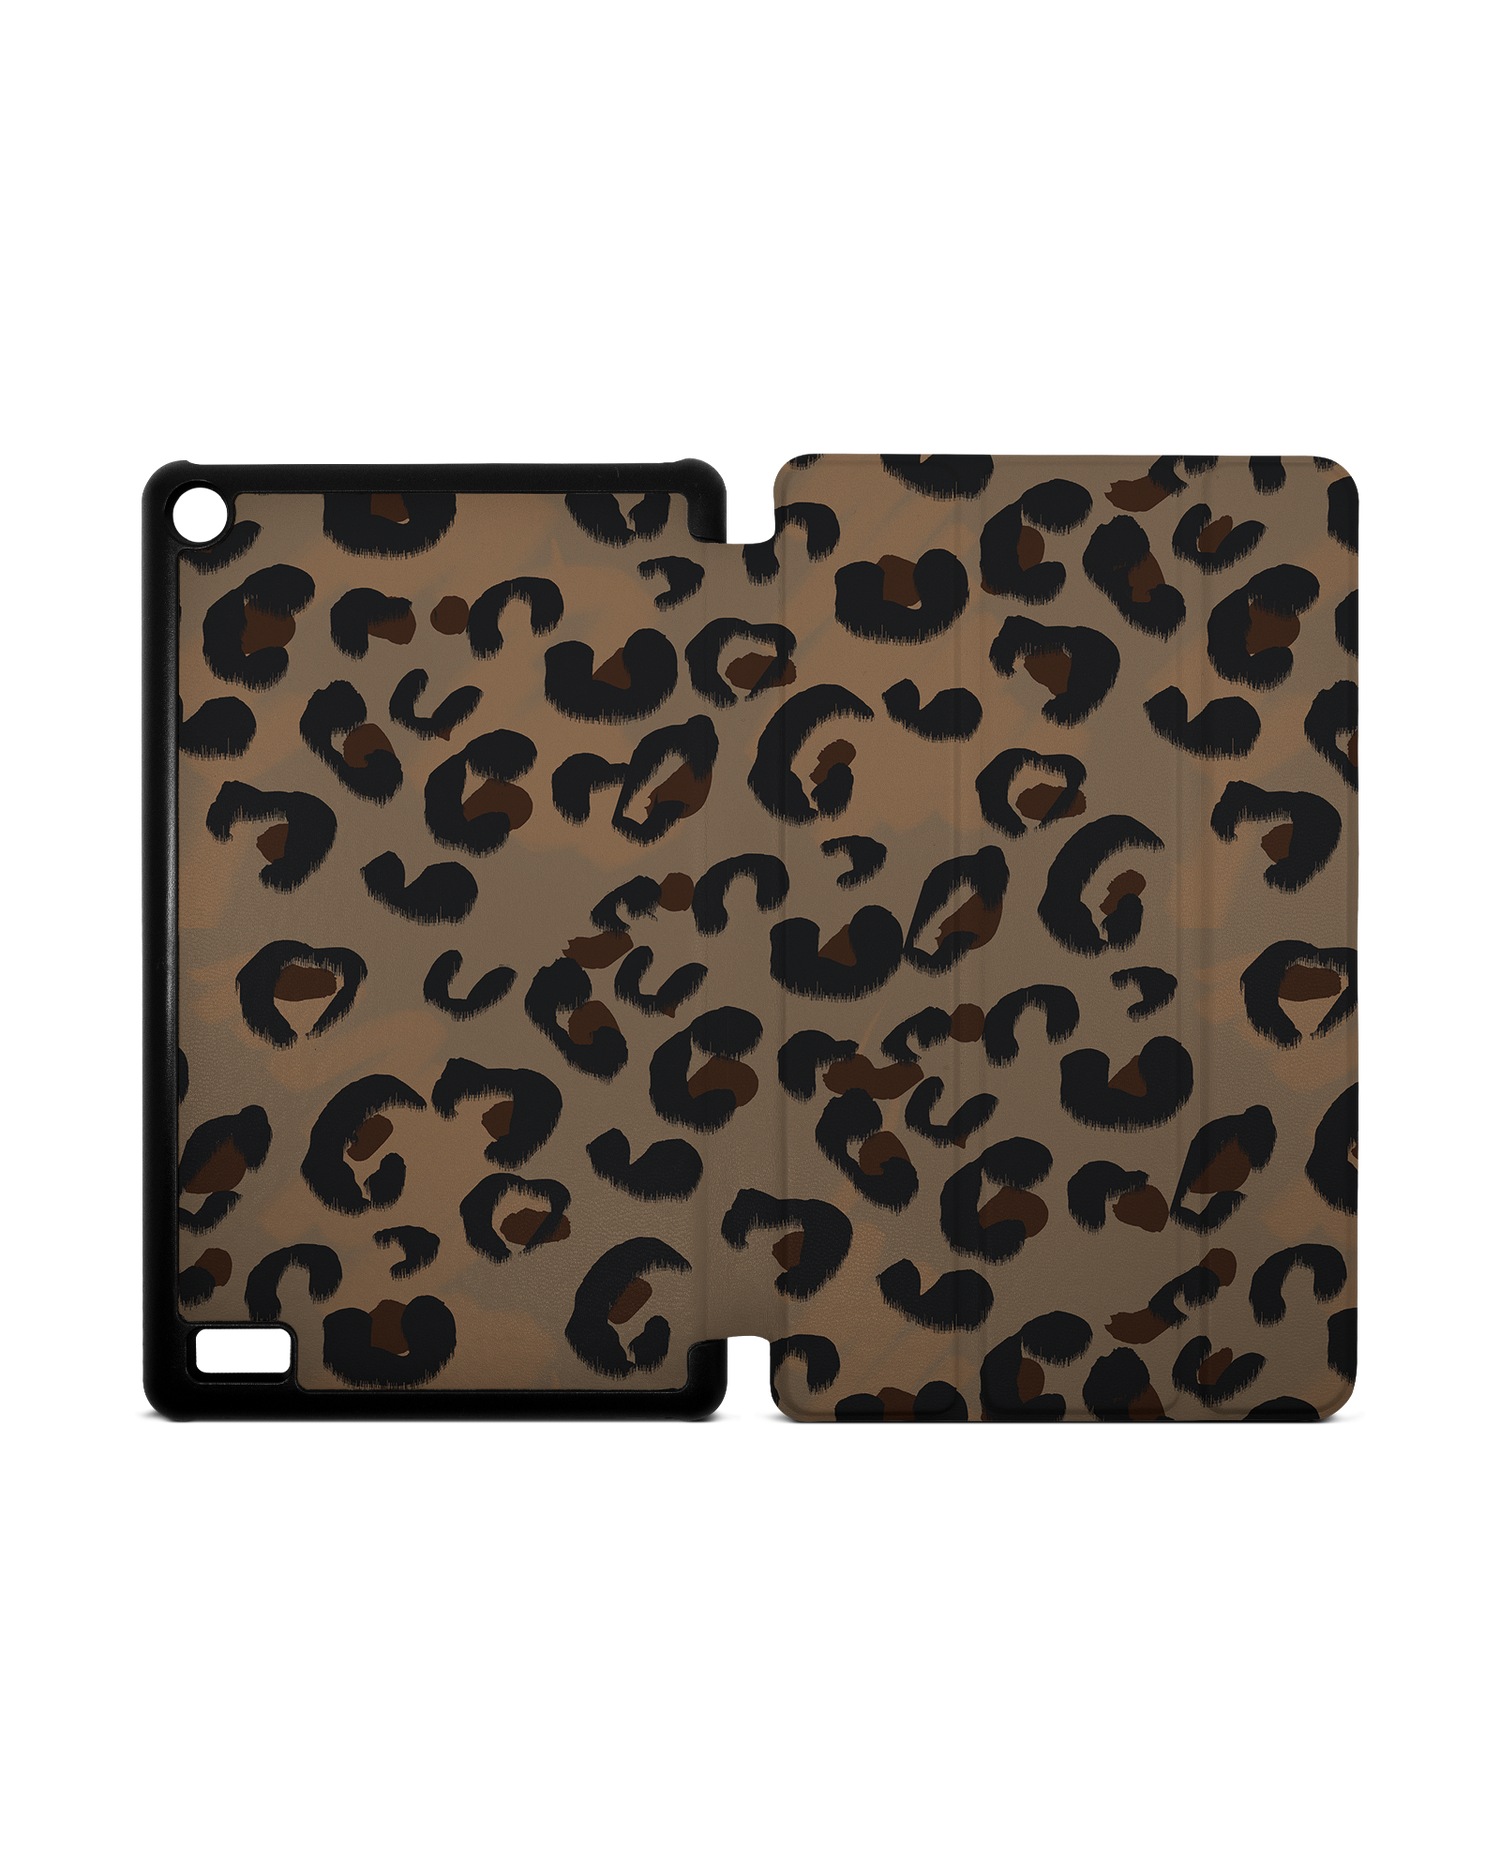 Leopard Repeat Tablet Smart Case for Amazon Fire 7: Opened